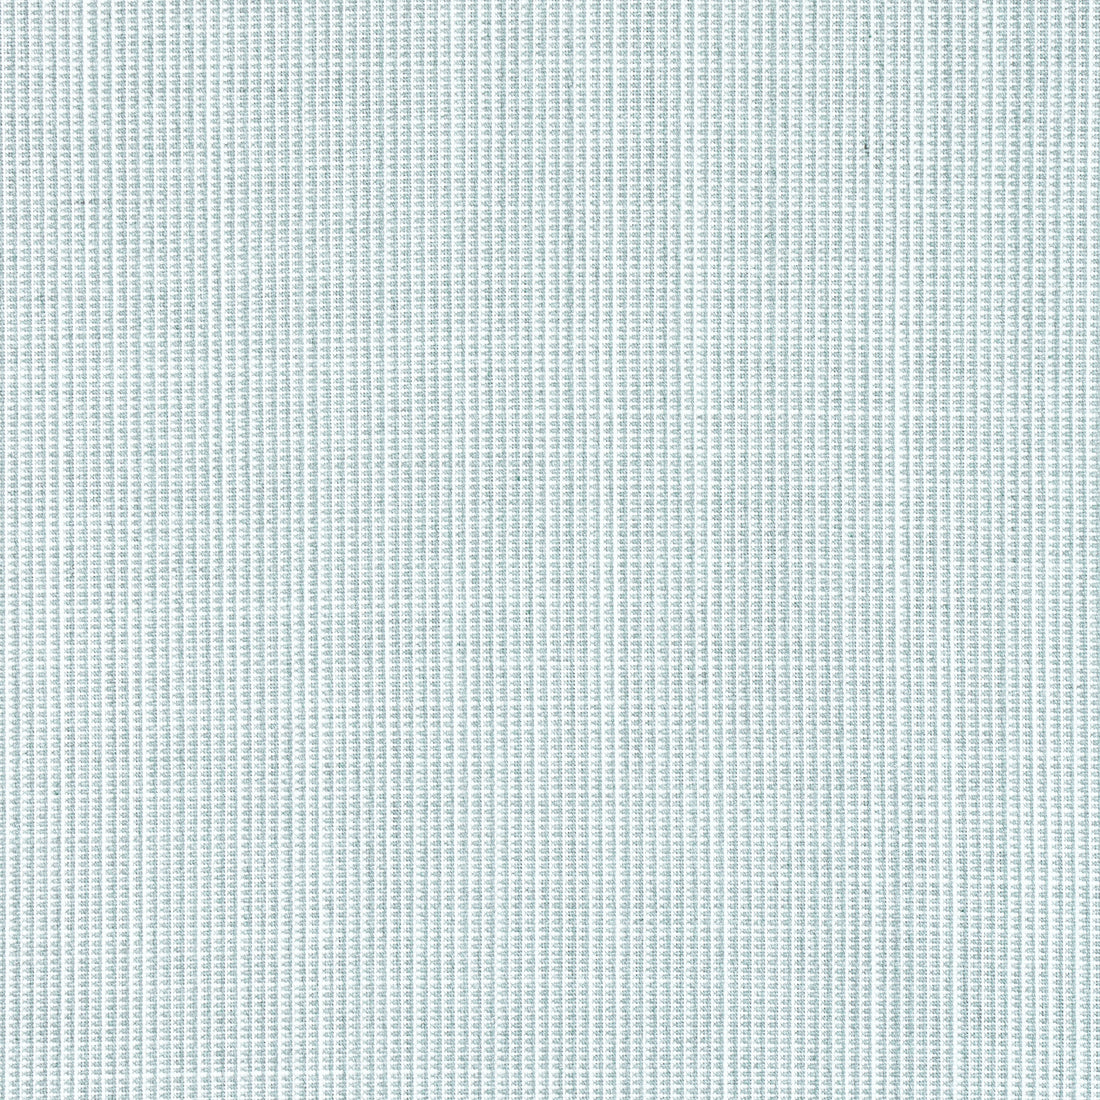 Mateo fabric in seafoam color - pattern number W8550 - by Thibaut in the Villa Textures collection